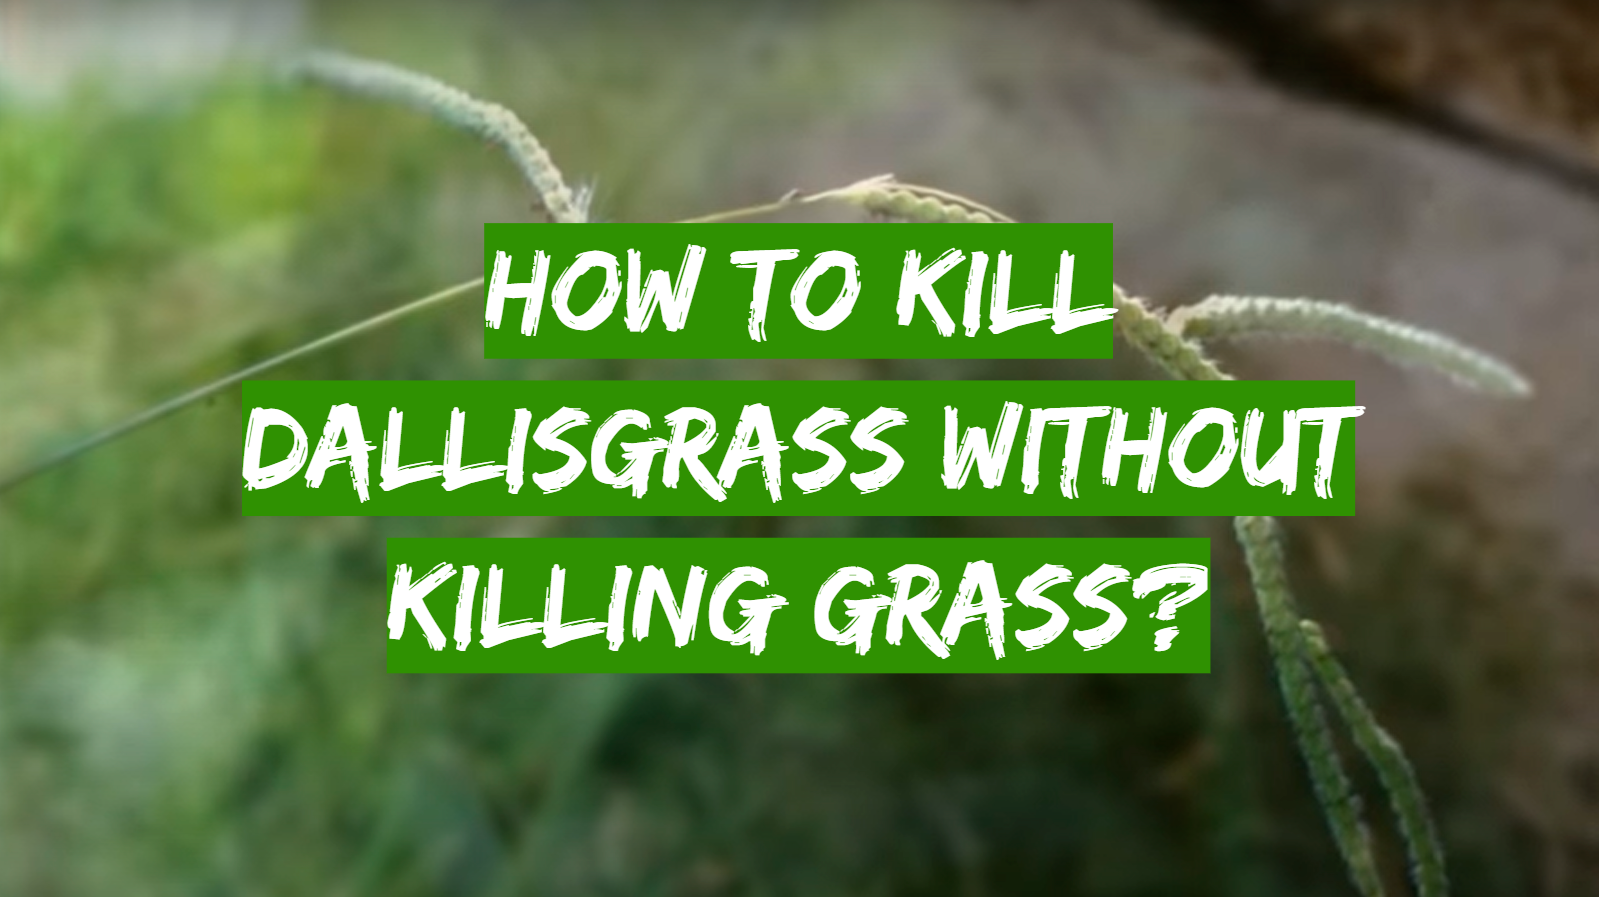 How to Kill Dallisgrass Without Killing Grass?